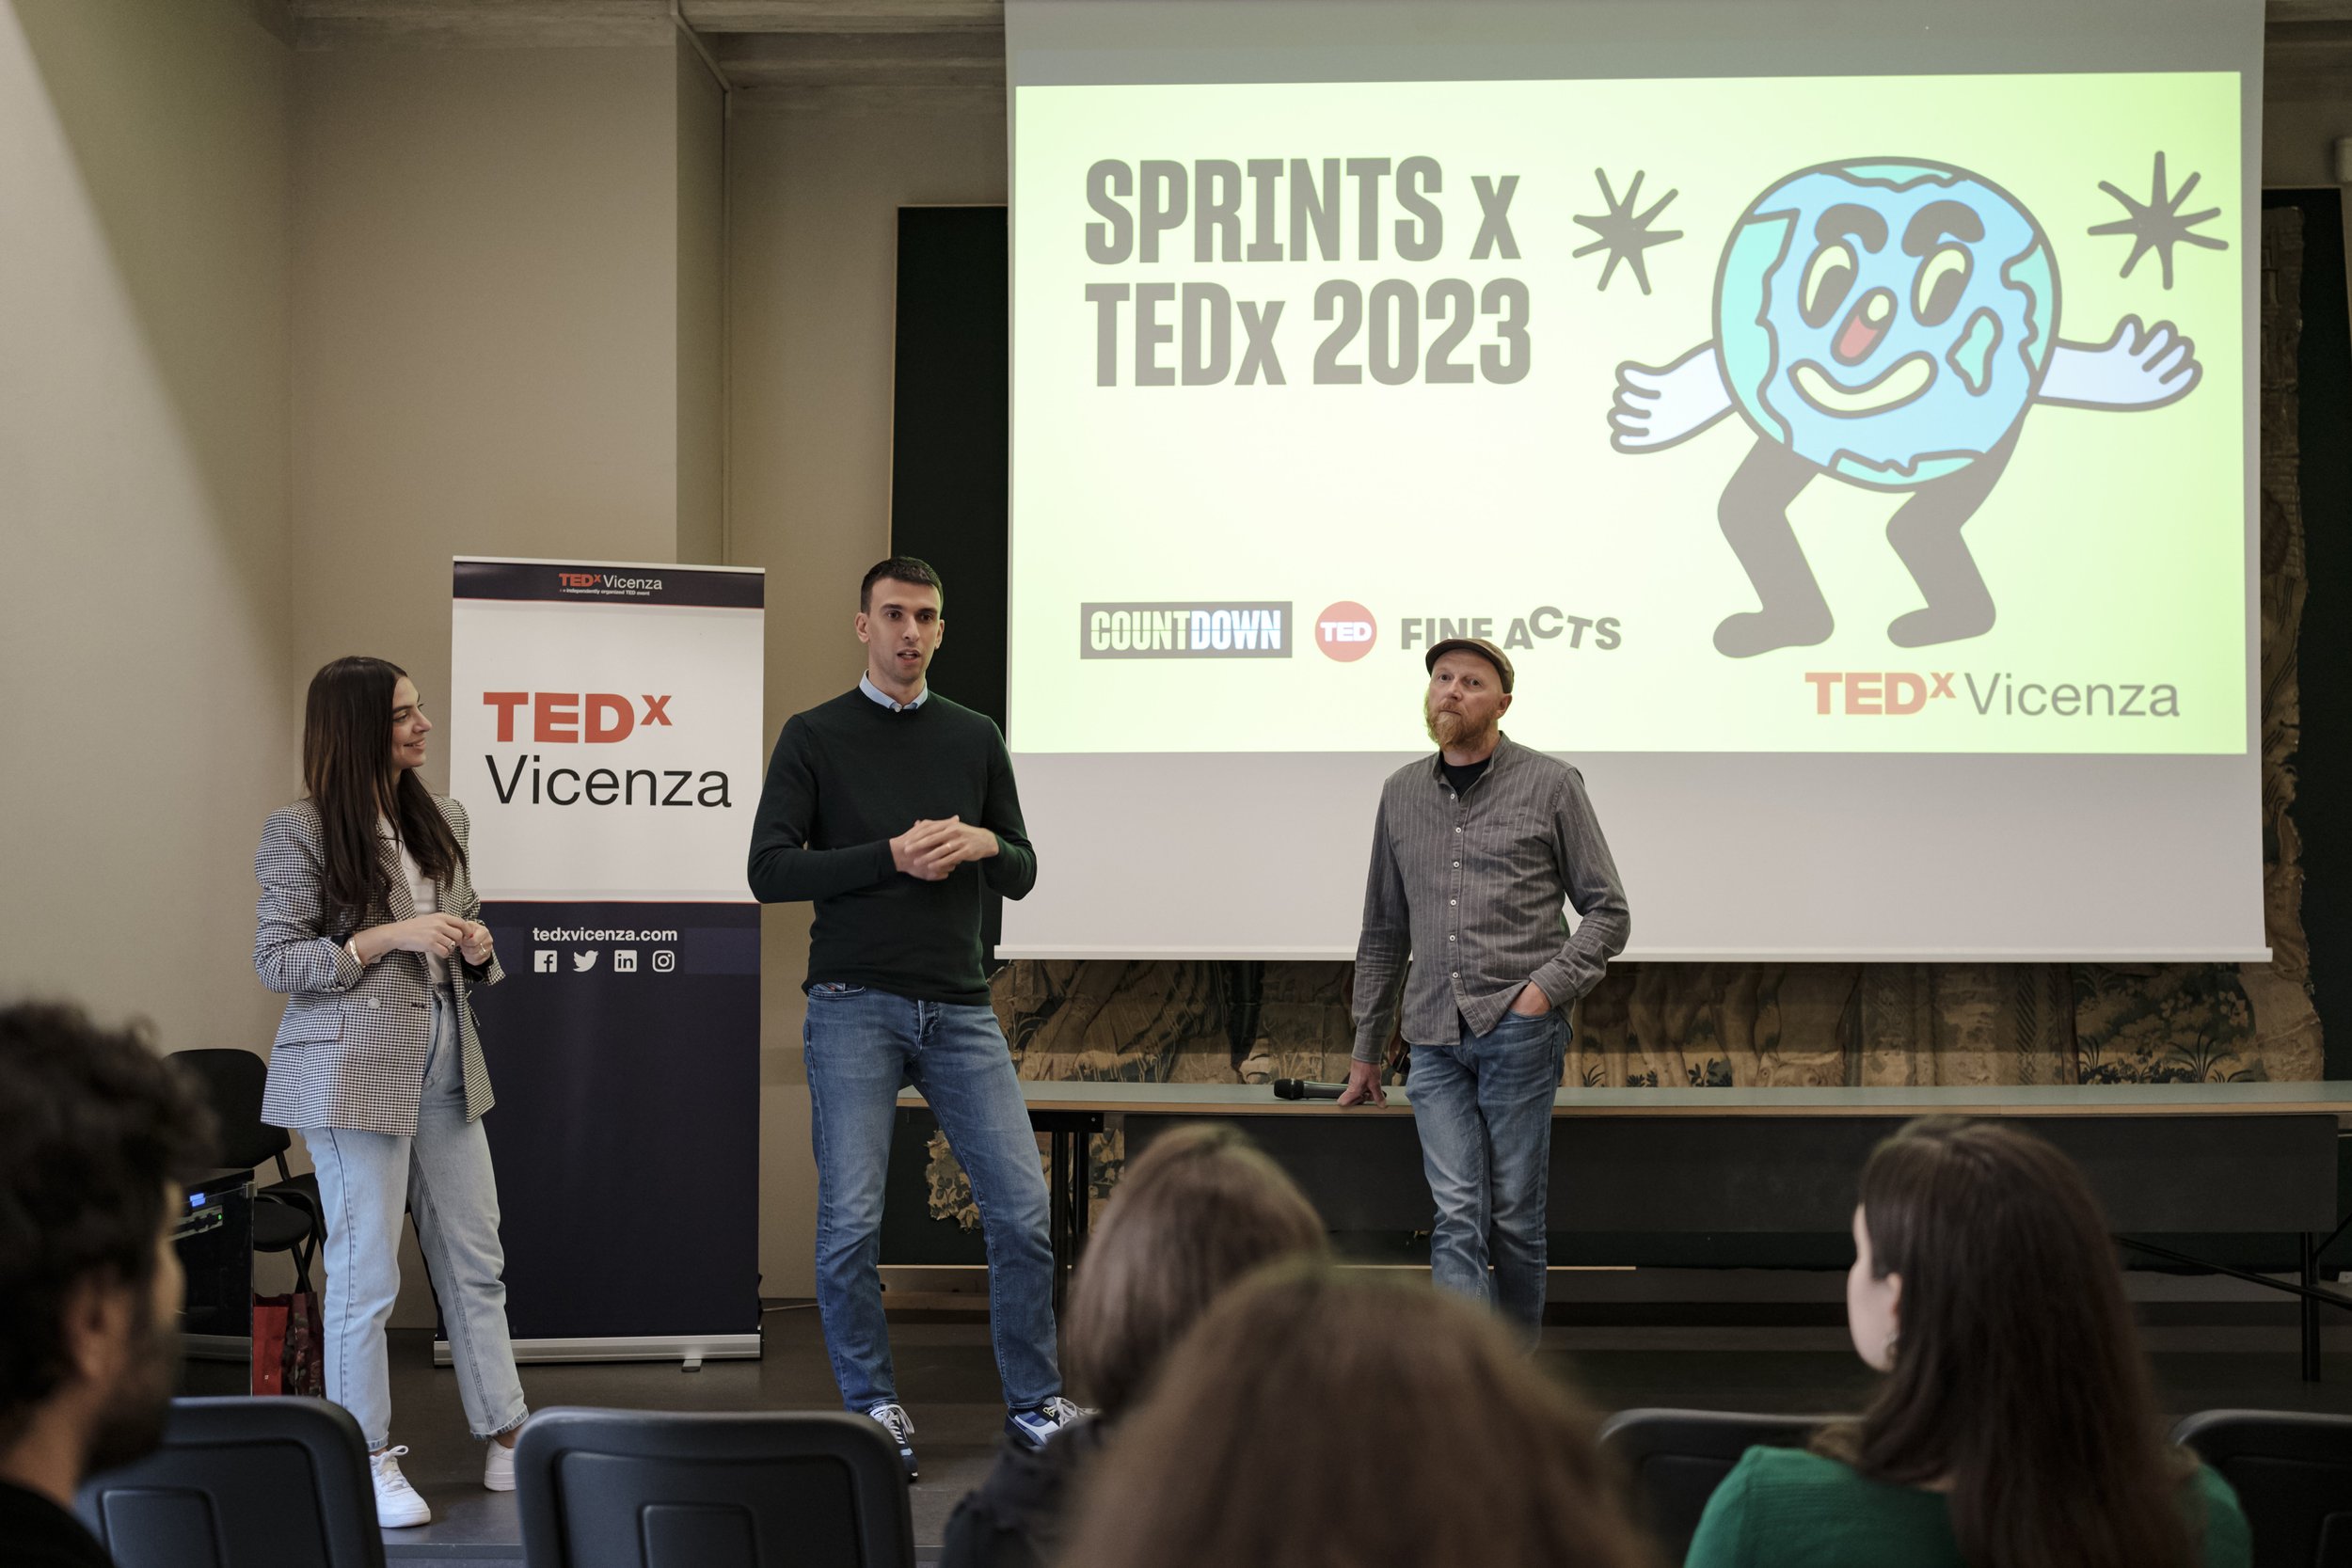 tedxvicenza--sprints-for-tedx-countdown_53331038382_o.jpg